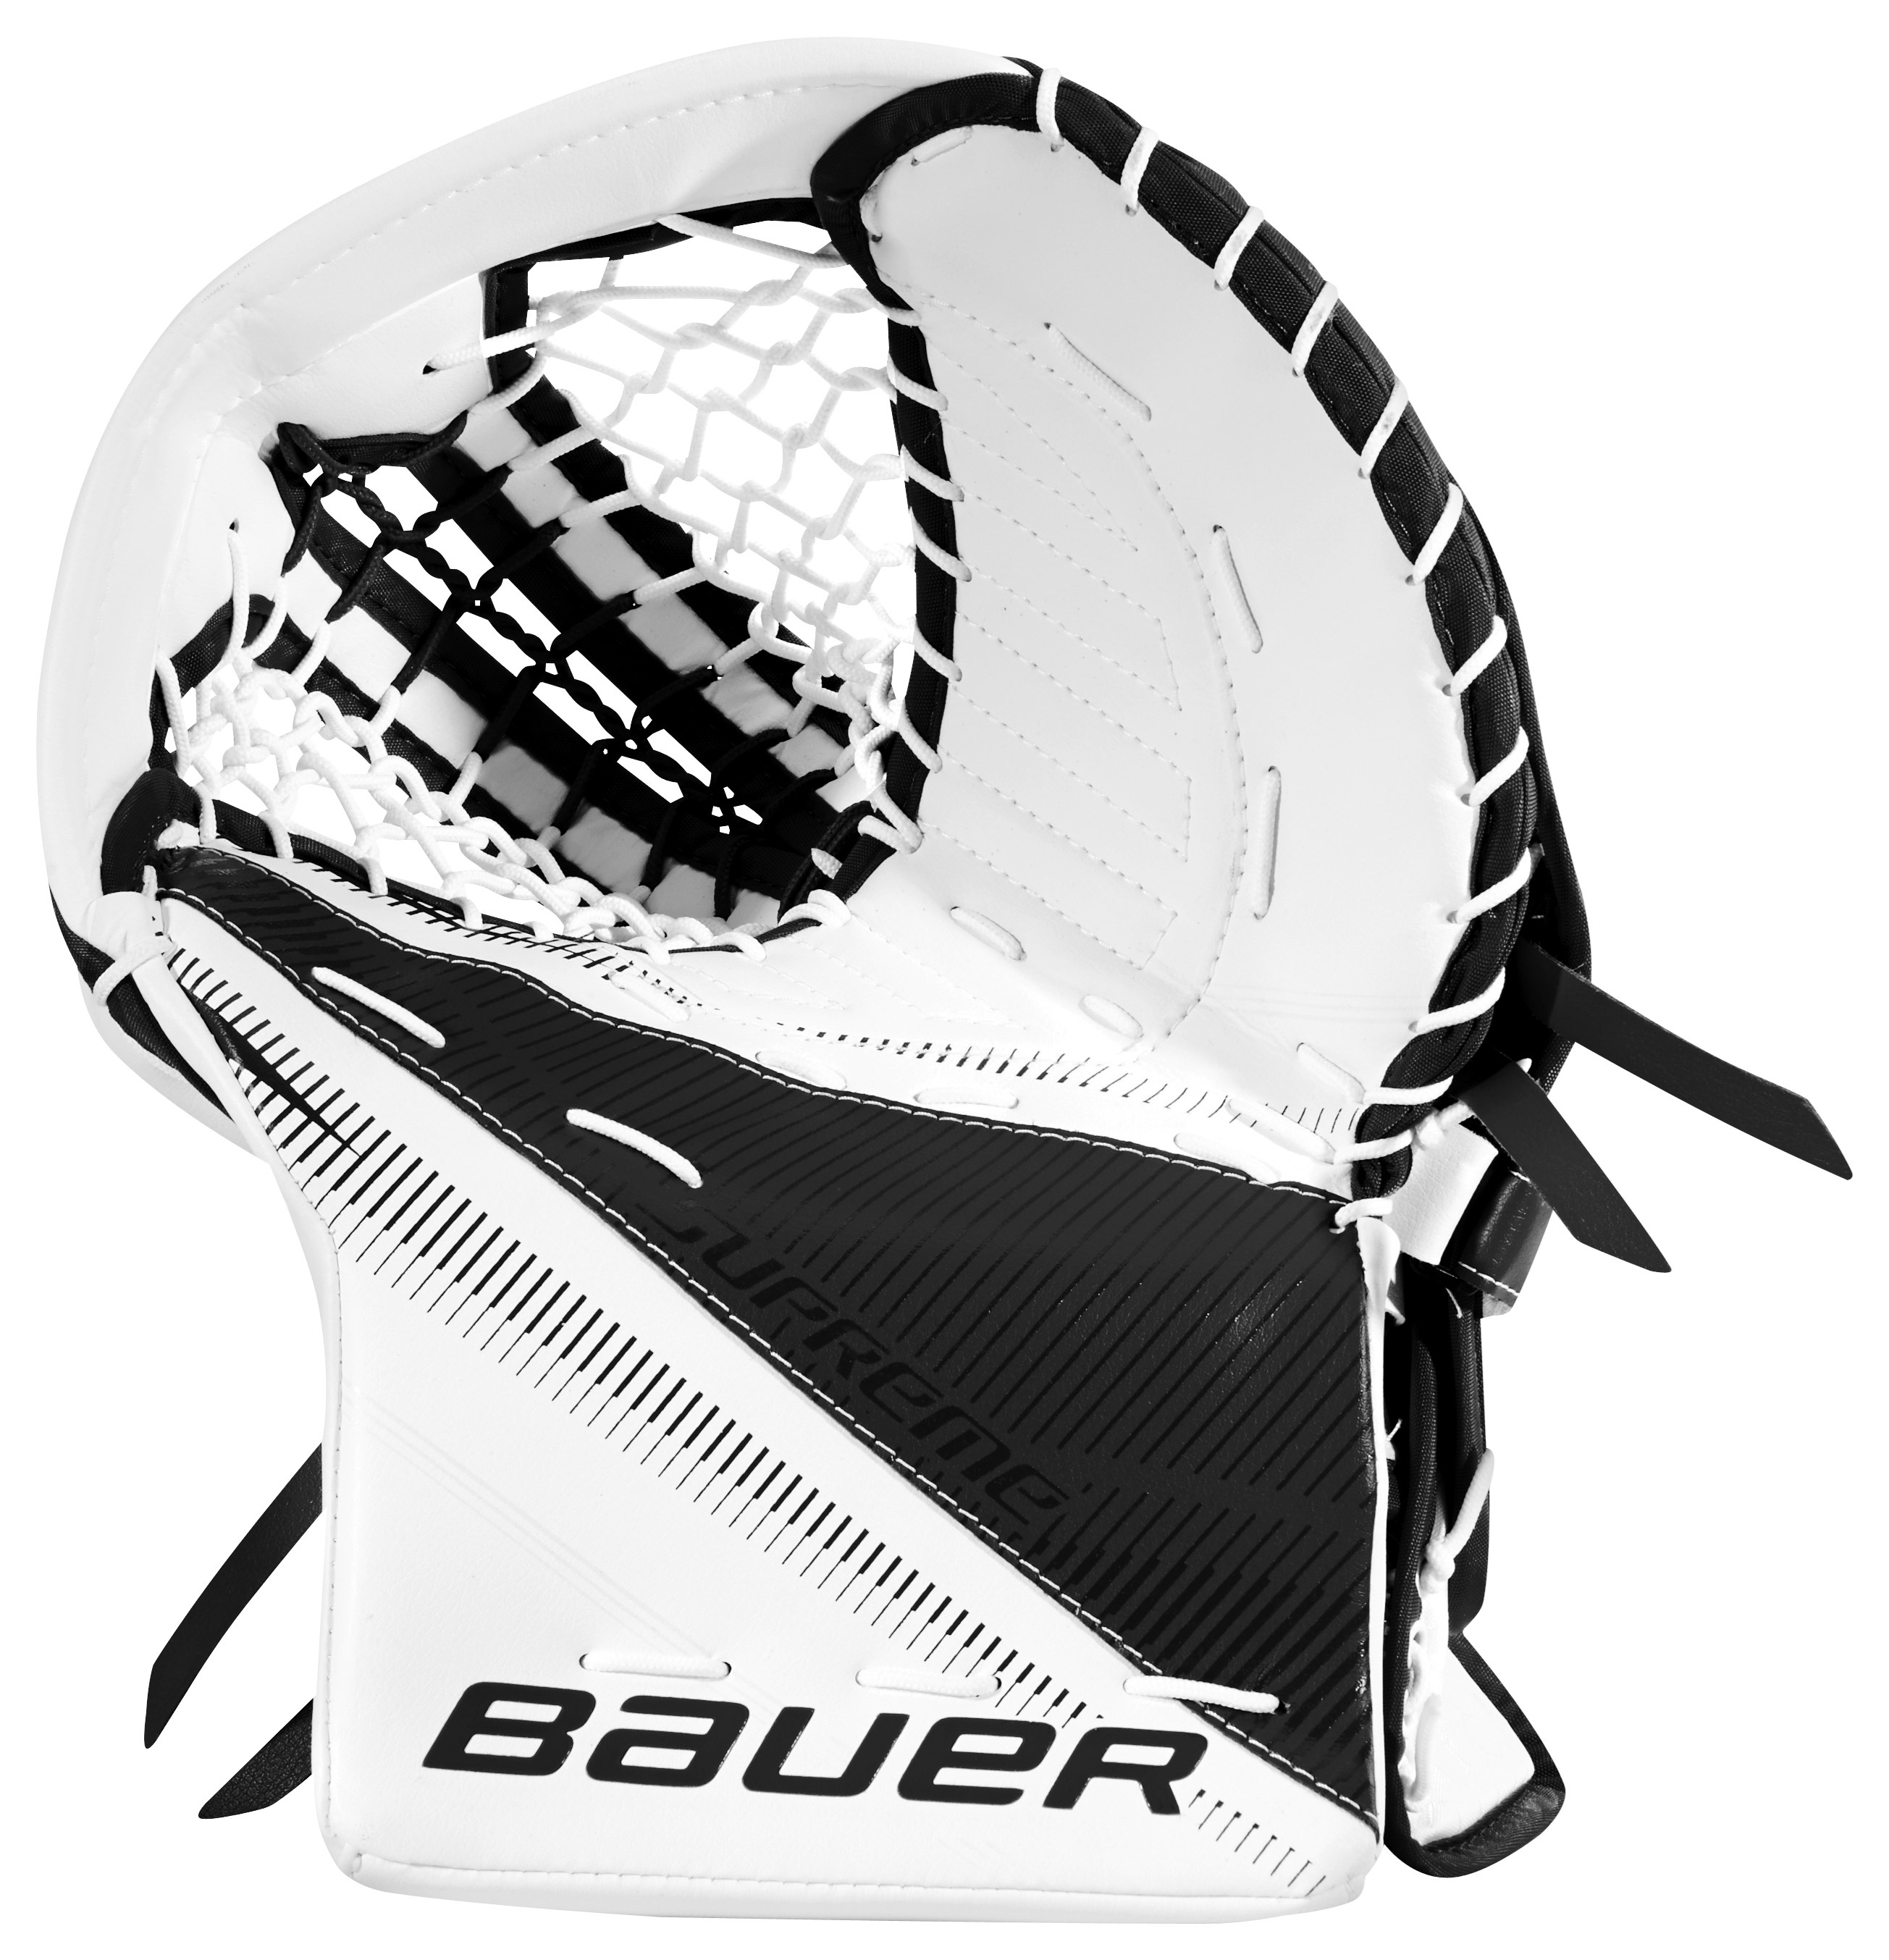   Bauer S29 S18 INT (Booking)